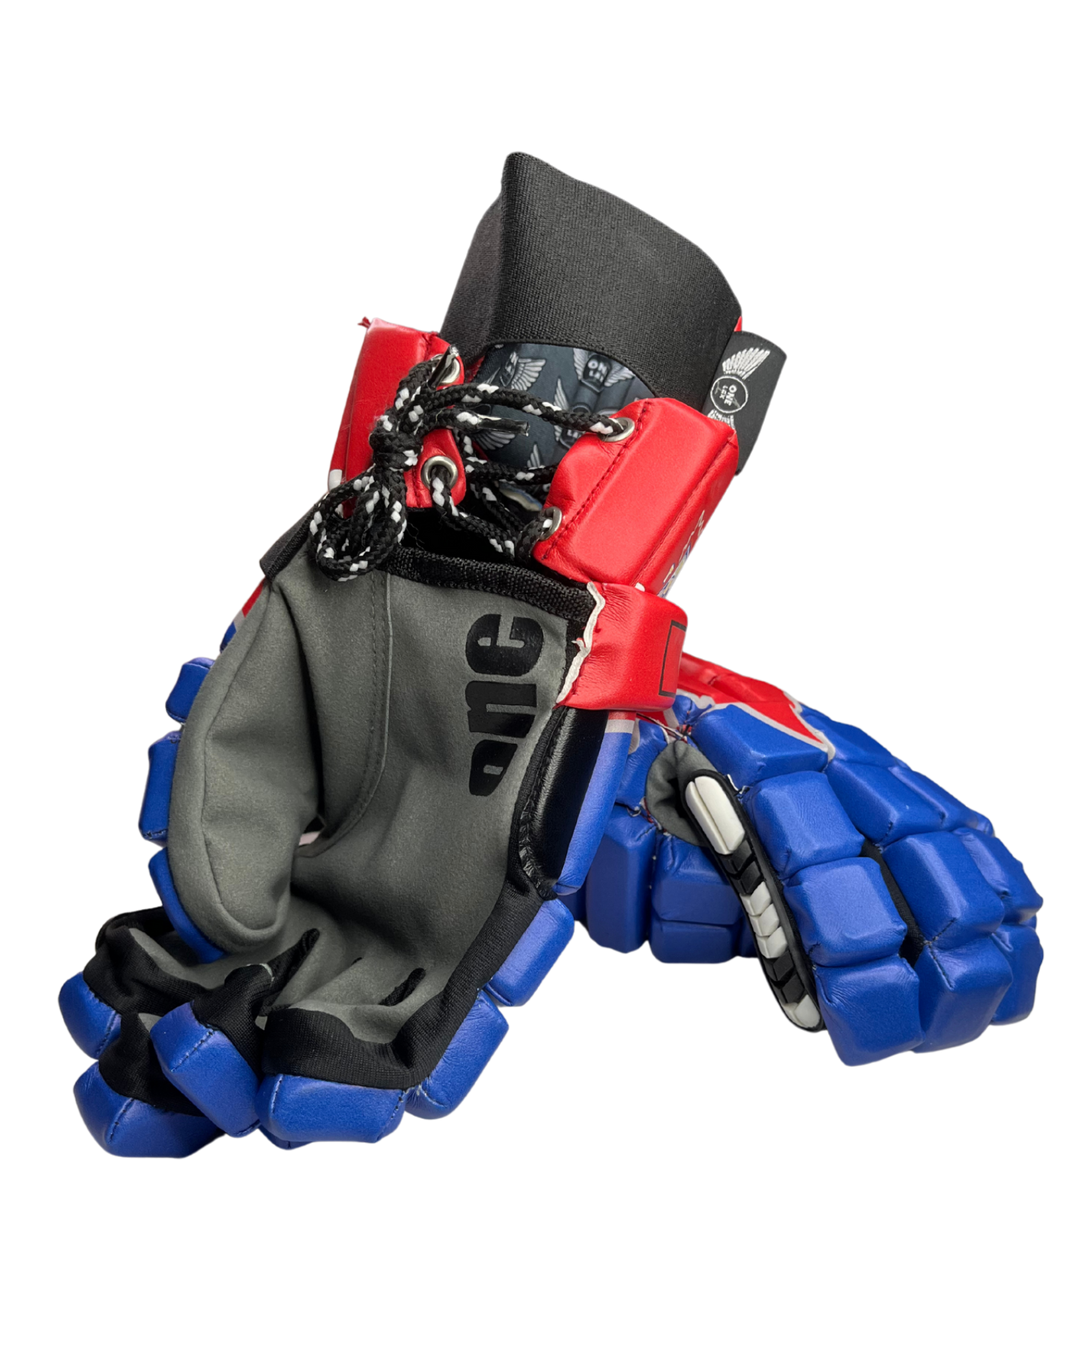 1 Gloves in Toronto Rock - Rock Star Theme | 4 Adult & 2 Jr. Kids Sizes Available | HYBRID Box & Field Lacrosse Gloves - One Lax